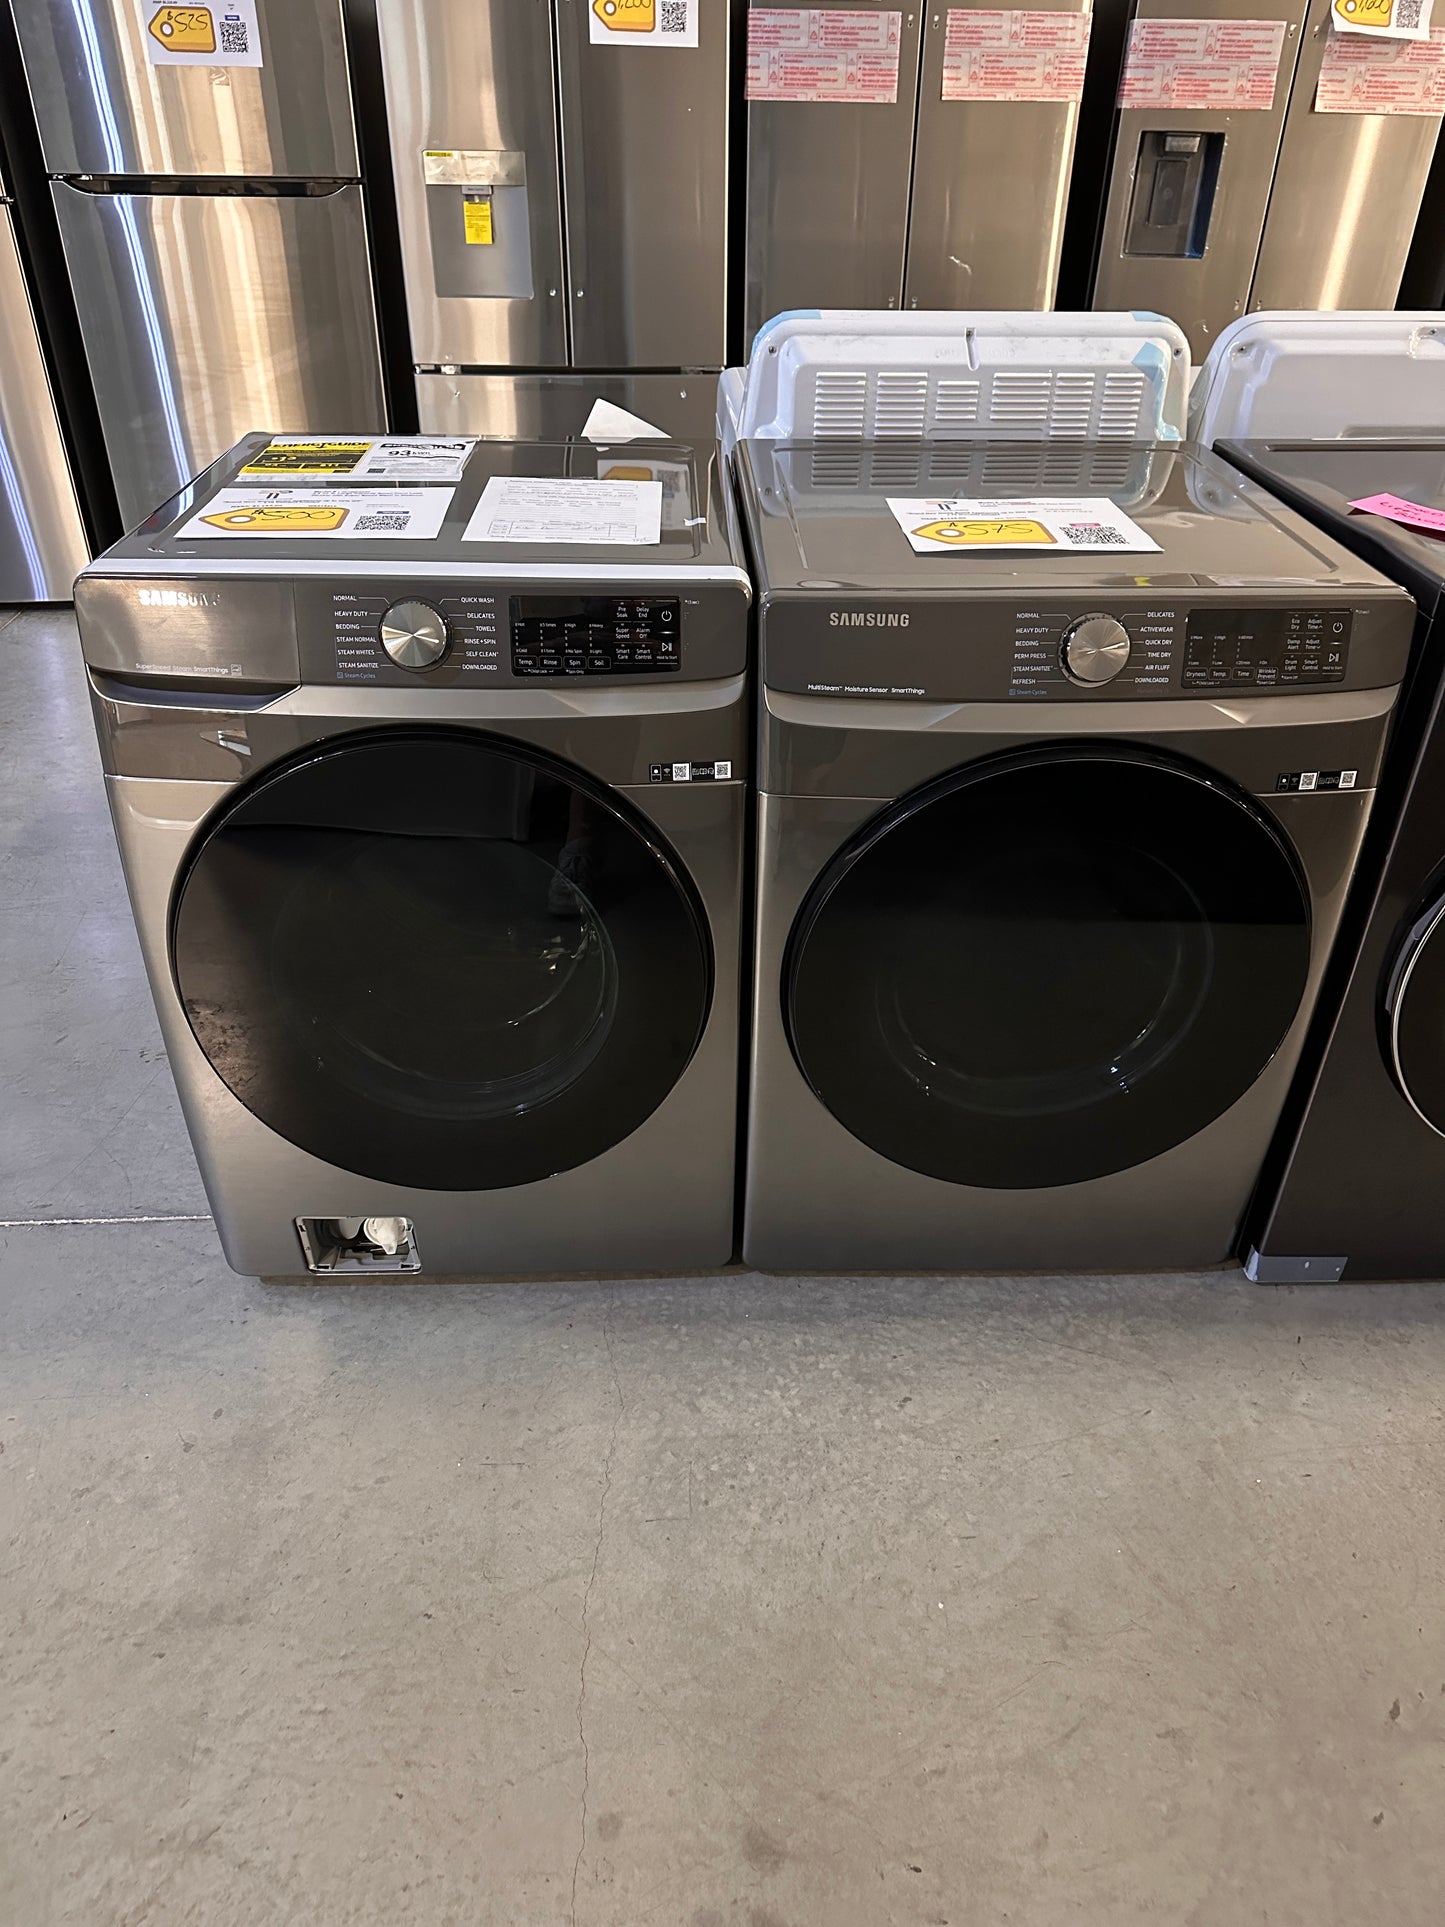 NEW PLATINUM SAMSUNG SMART LAUNDRY SET - FRONT LOAD WASHER ELECTRIC DRYER - WAS13219 DRY12486